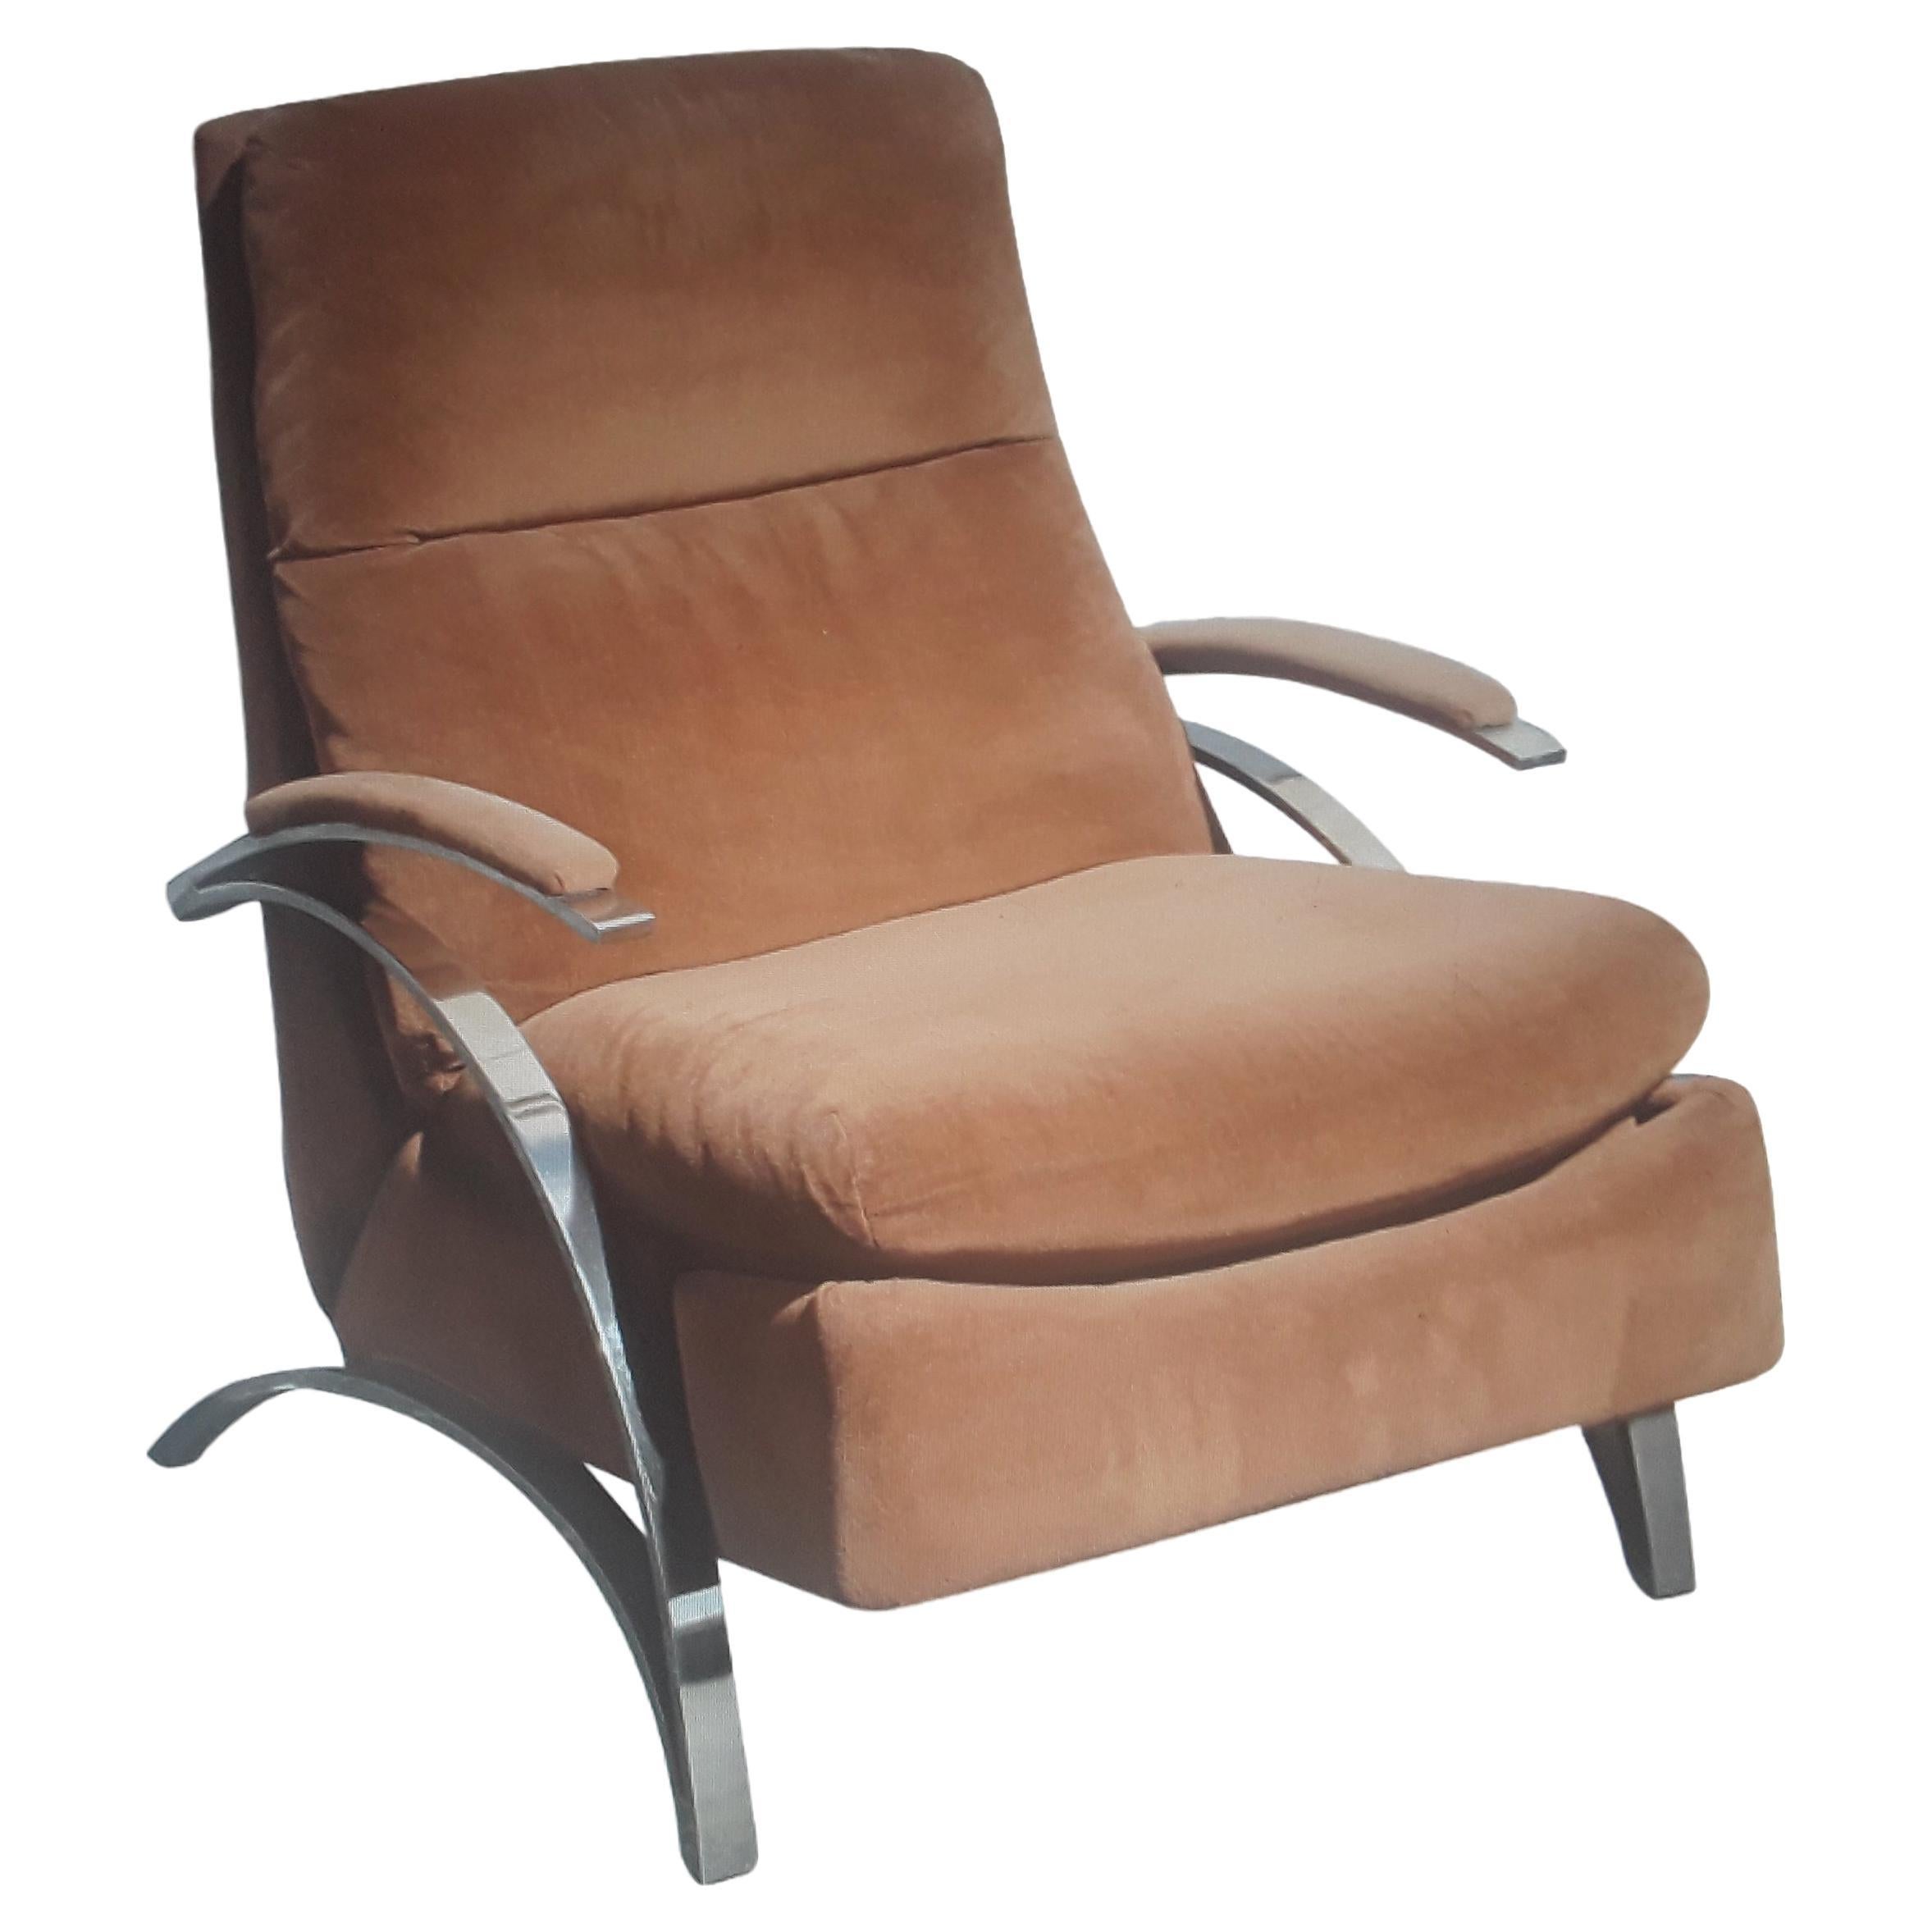 1970's Modern Plush Brown w/ Chrome Barcalounger Recliner/ Lounge Chair For Sale